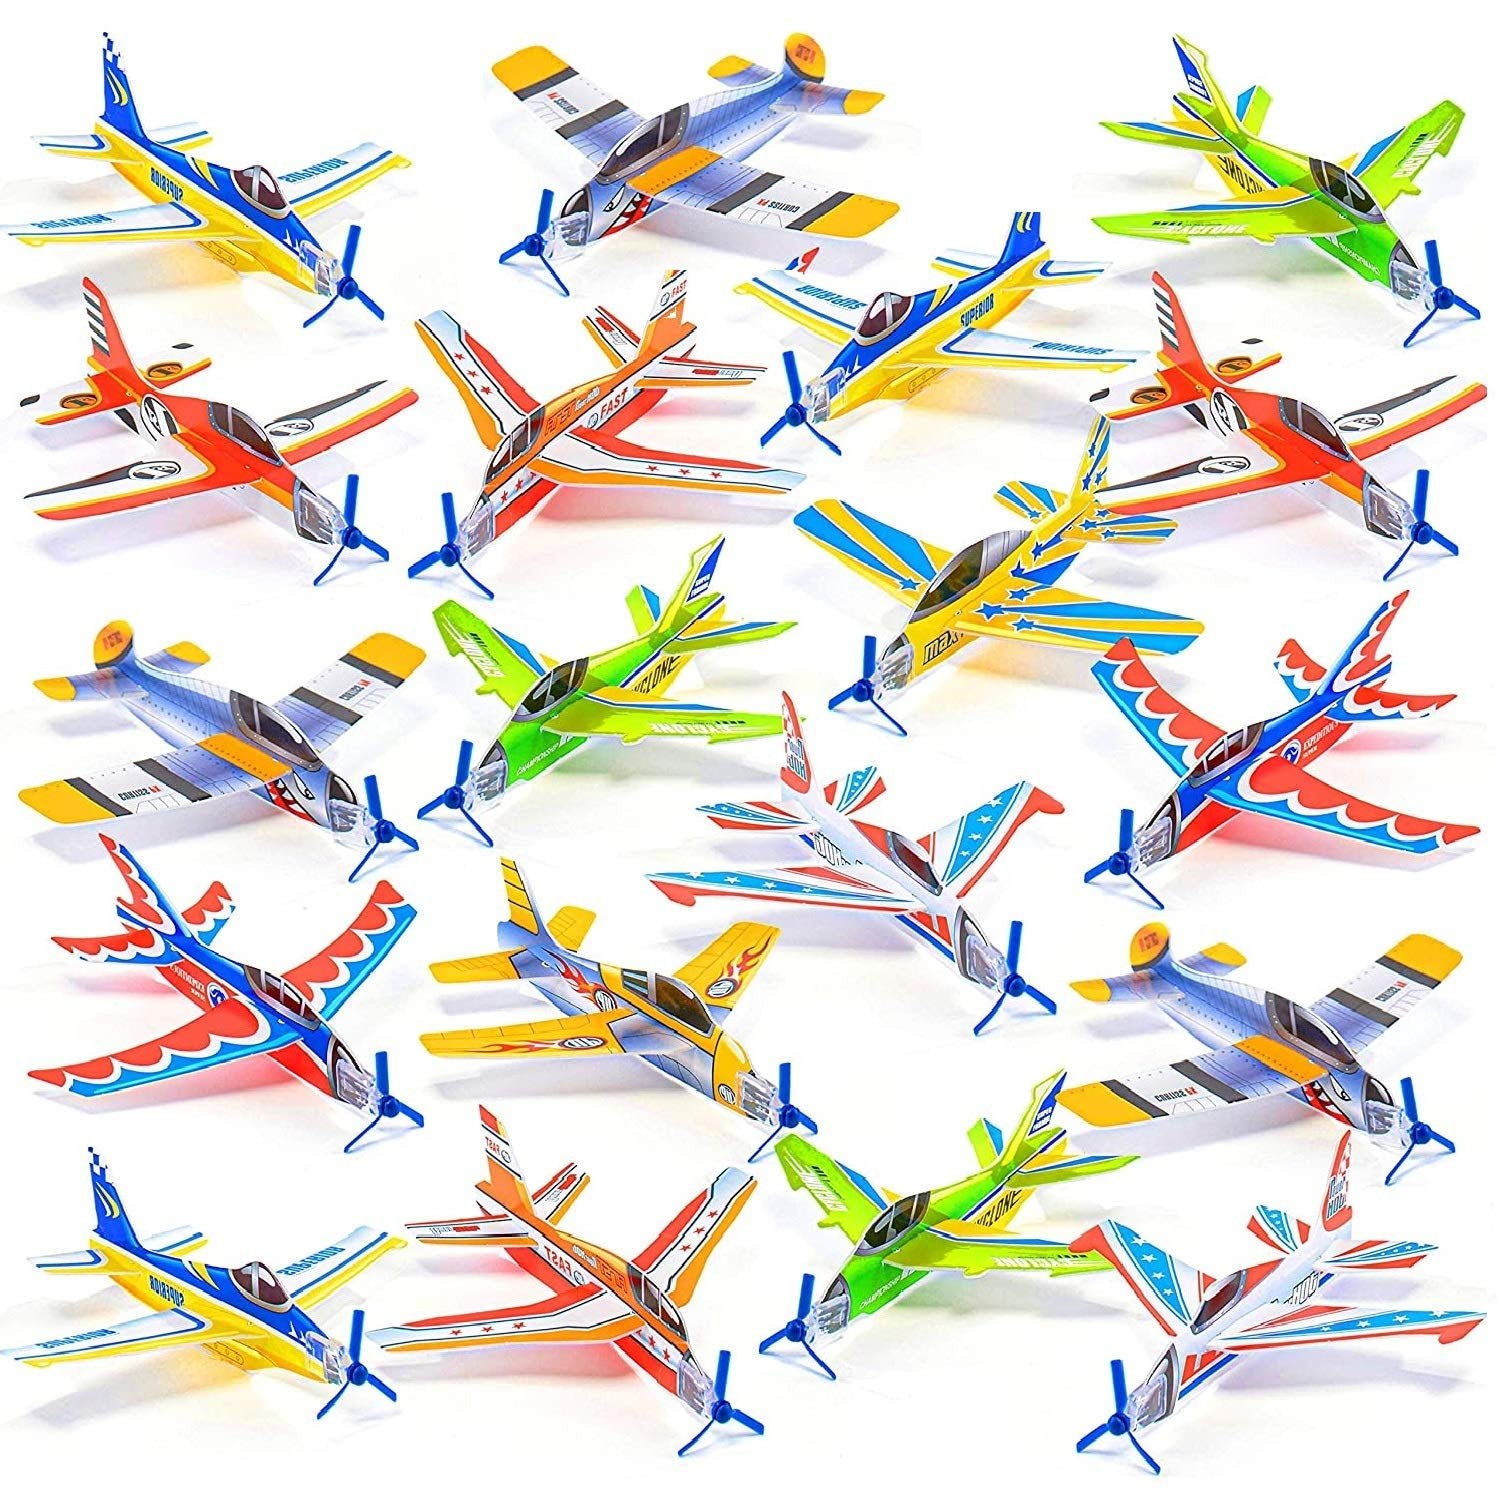 Prextex 25 Pack Large 8'' Flying Foam Outdoor Outside Glider Planes Toys for Boy, and Kids Ages 4-8 5 8-10 Years Old - Great Plane Birthday Gift - Party Favor DIY Take Apart Airplane Gliders